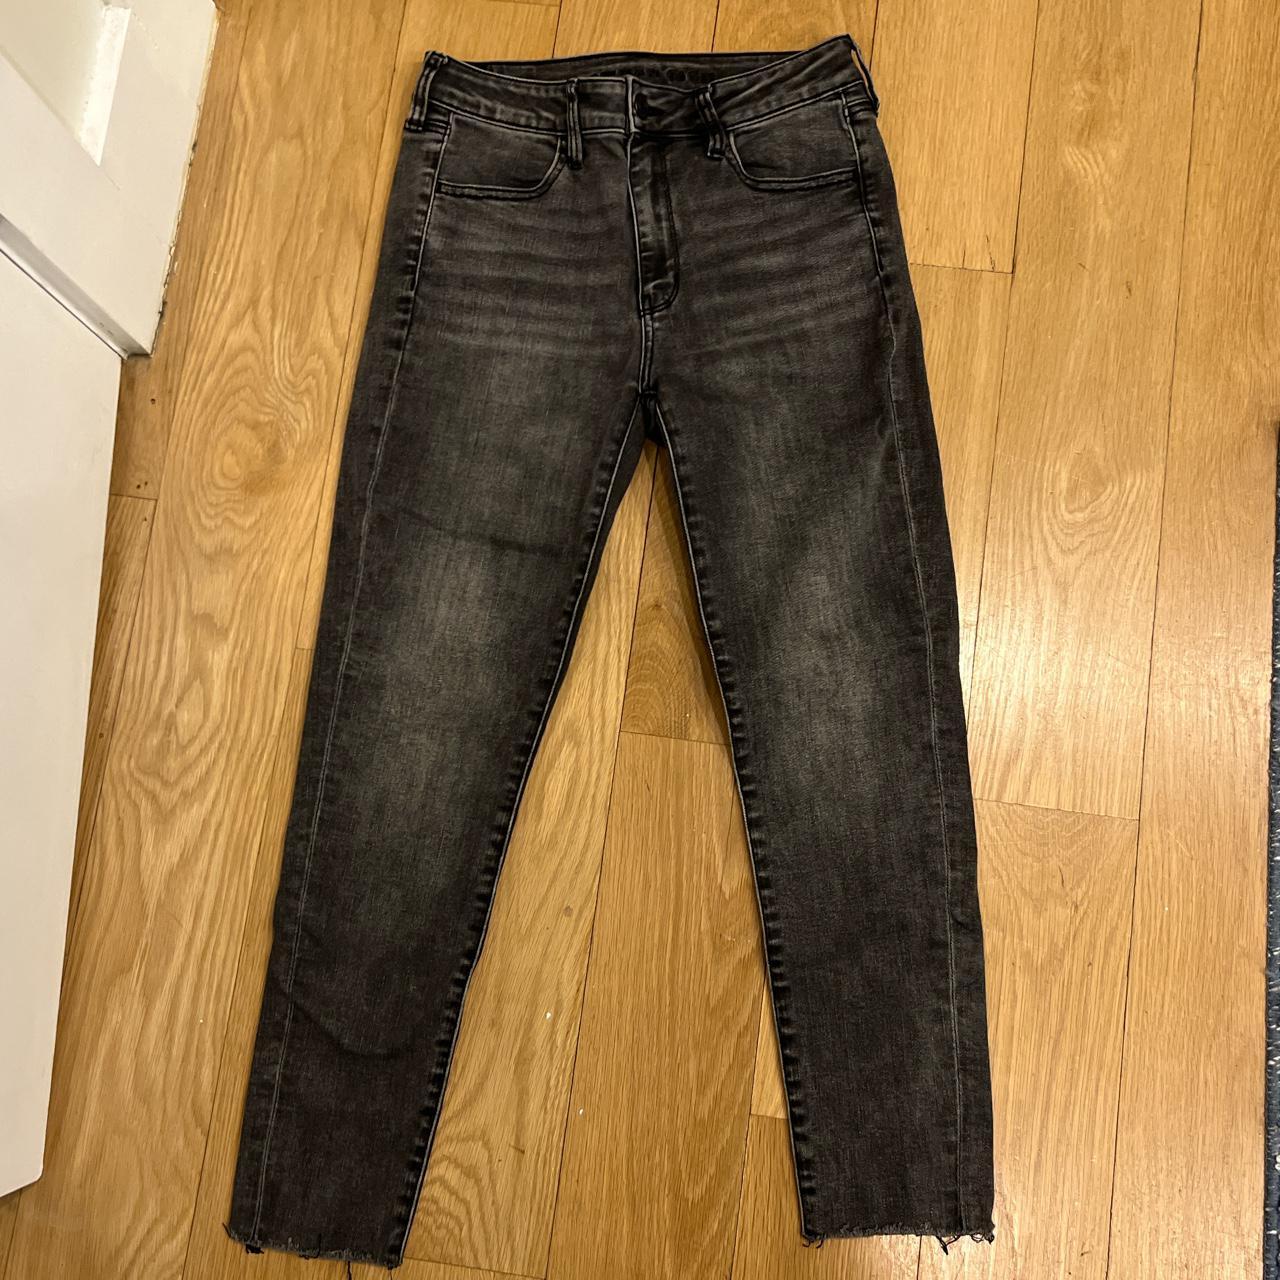 American Eagle Outfitters Women's Black and Grey Jeans | Depop